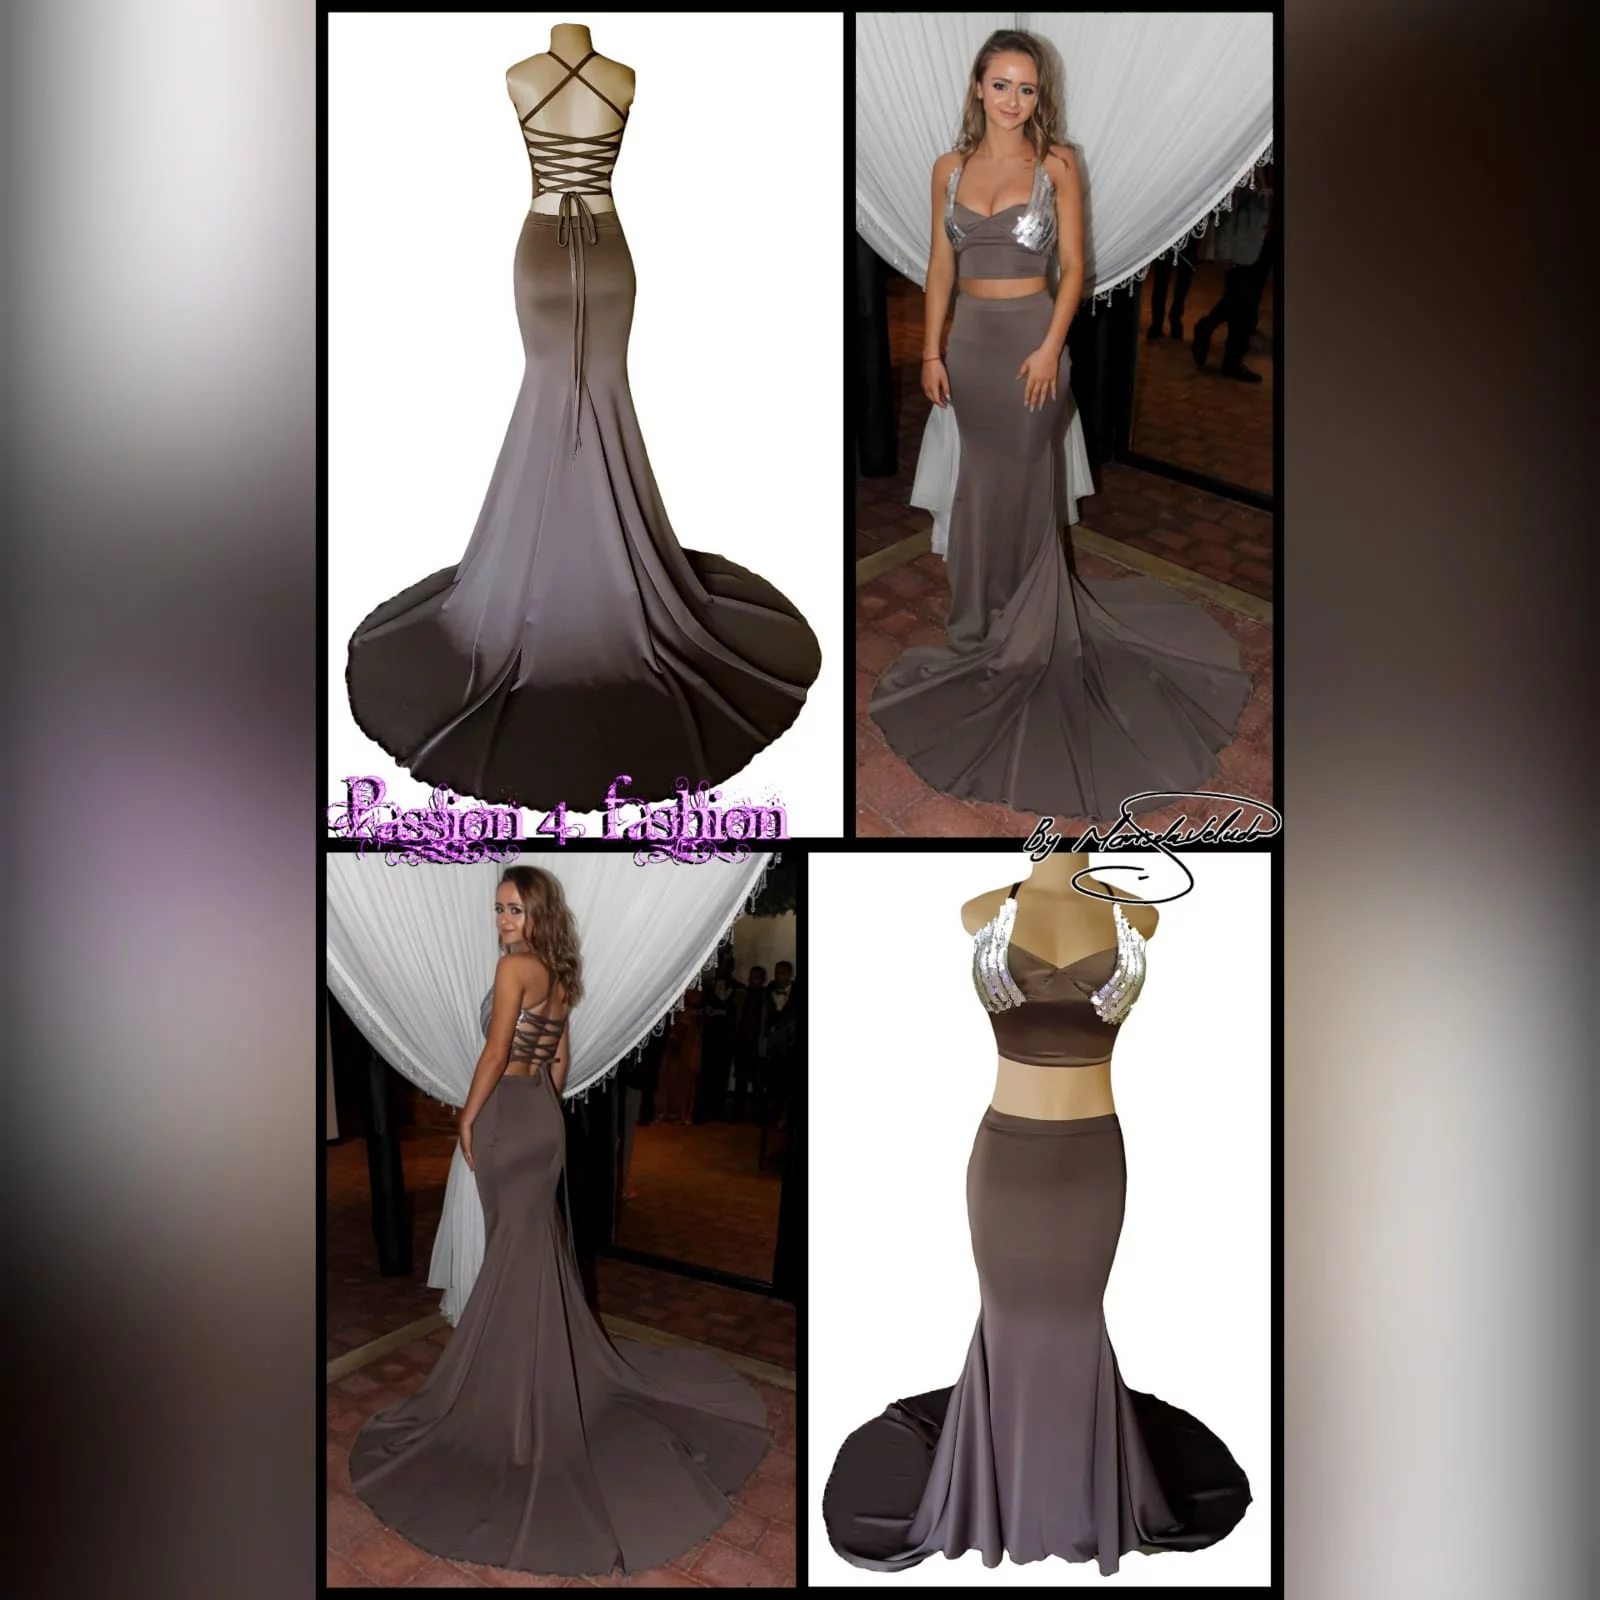 2 piece brown gray prom dress 6 2 piece brown gray prom dress. Skirt as a soft mermaid. Top with an open lace up back. Bust detailed with sequins. With a long train.